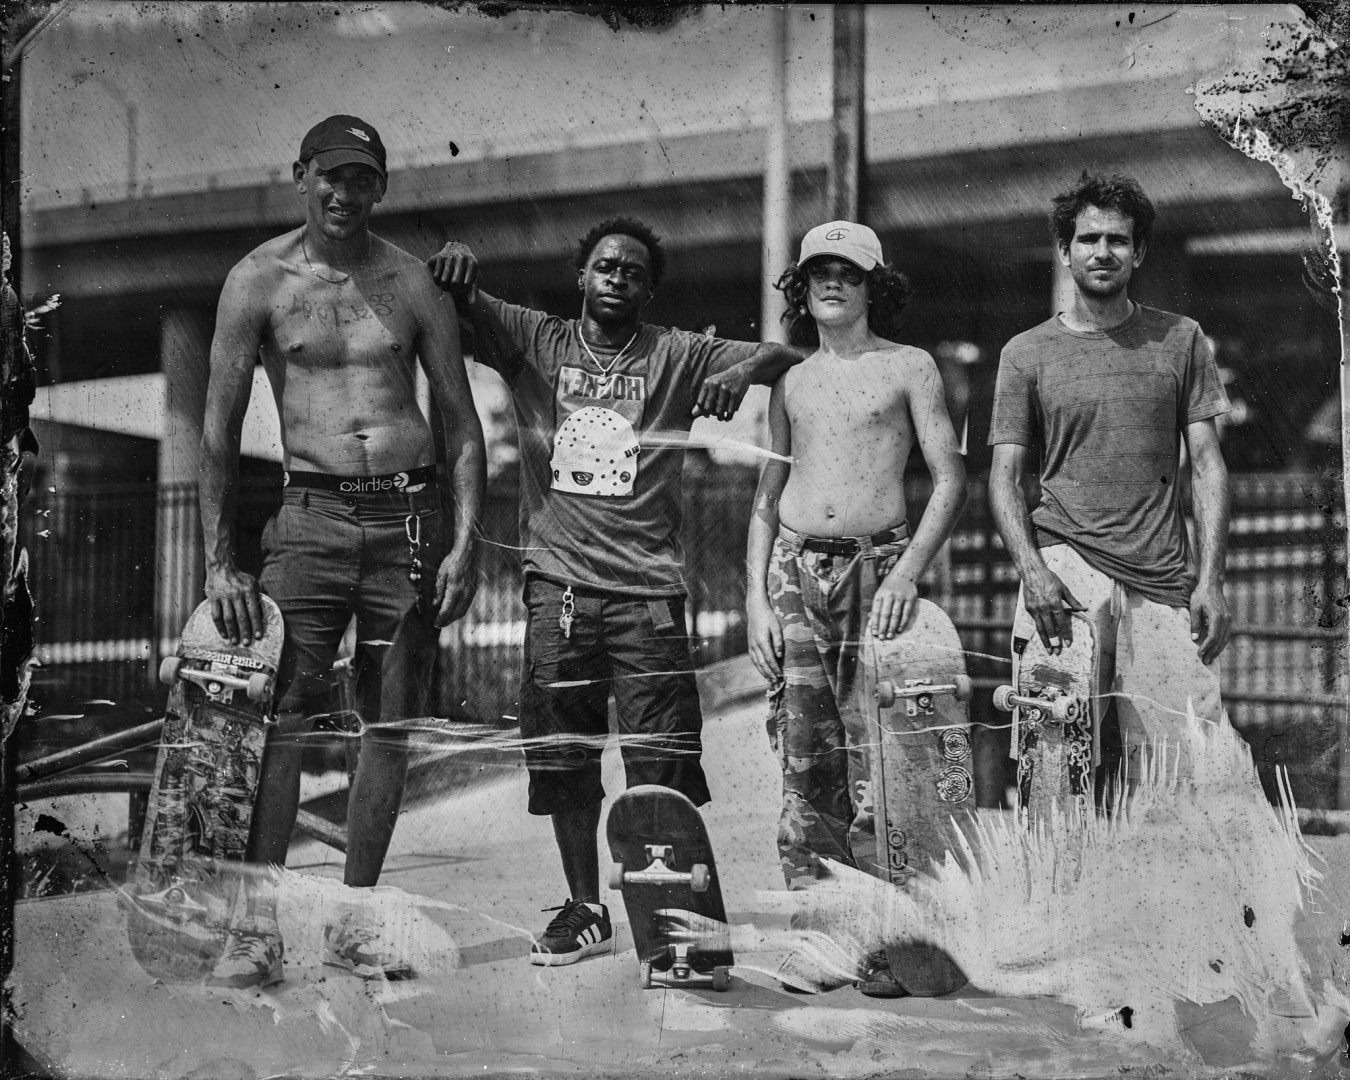 A tintype portrait of skaters at the Roc City Skatepark.